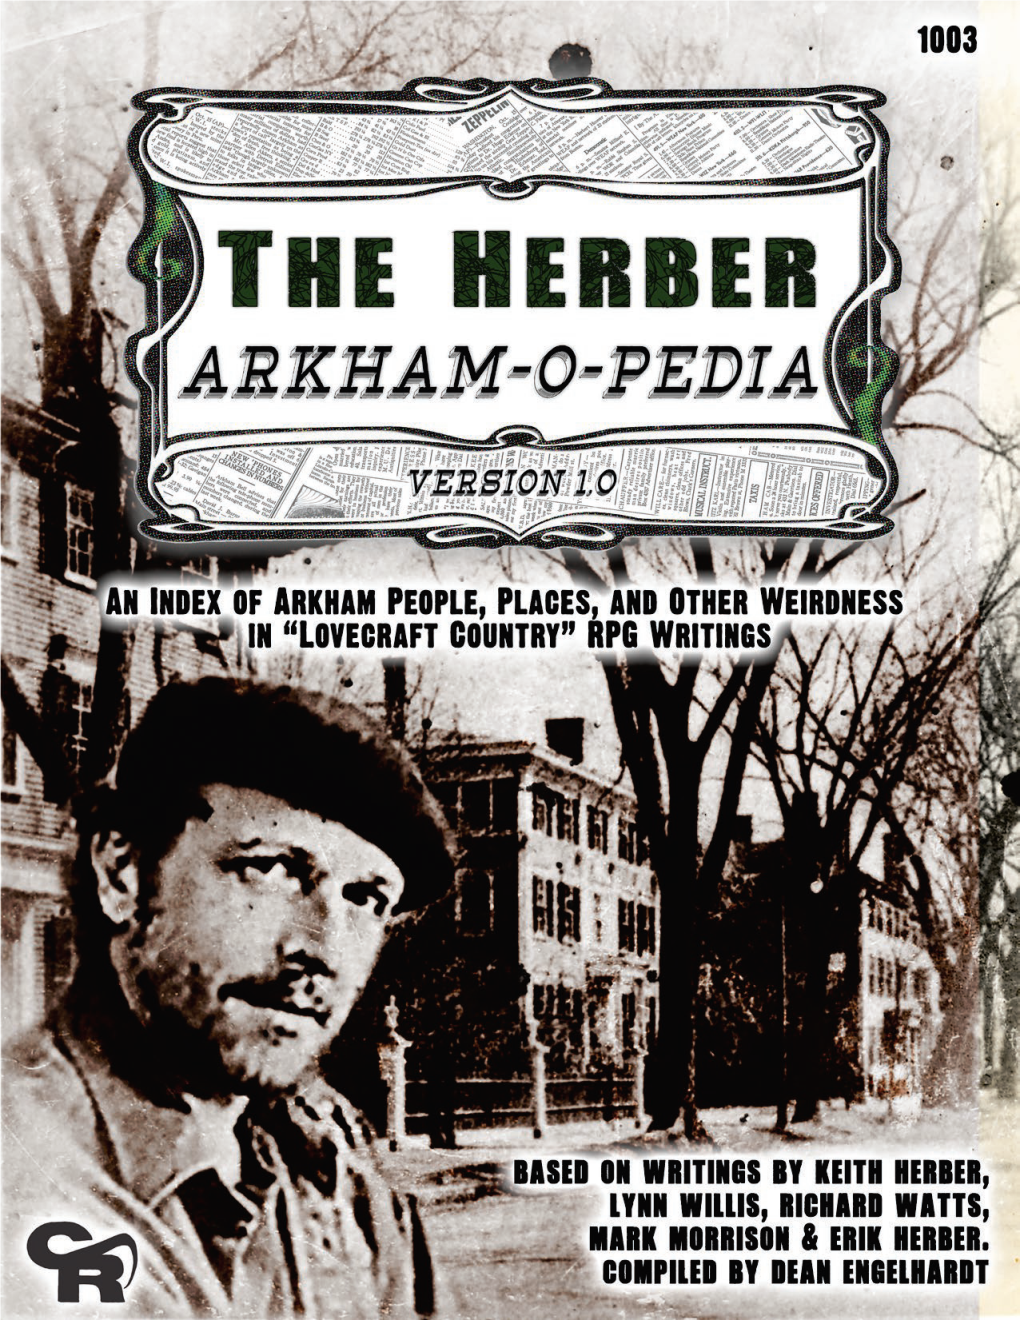 The Herber Arkham-O-Pedia Was Compiled in 2018 by Dean Engelhardt Based on Material That Was Published by Chaosium in a Range of Books: Arkham Unveiled, H.P